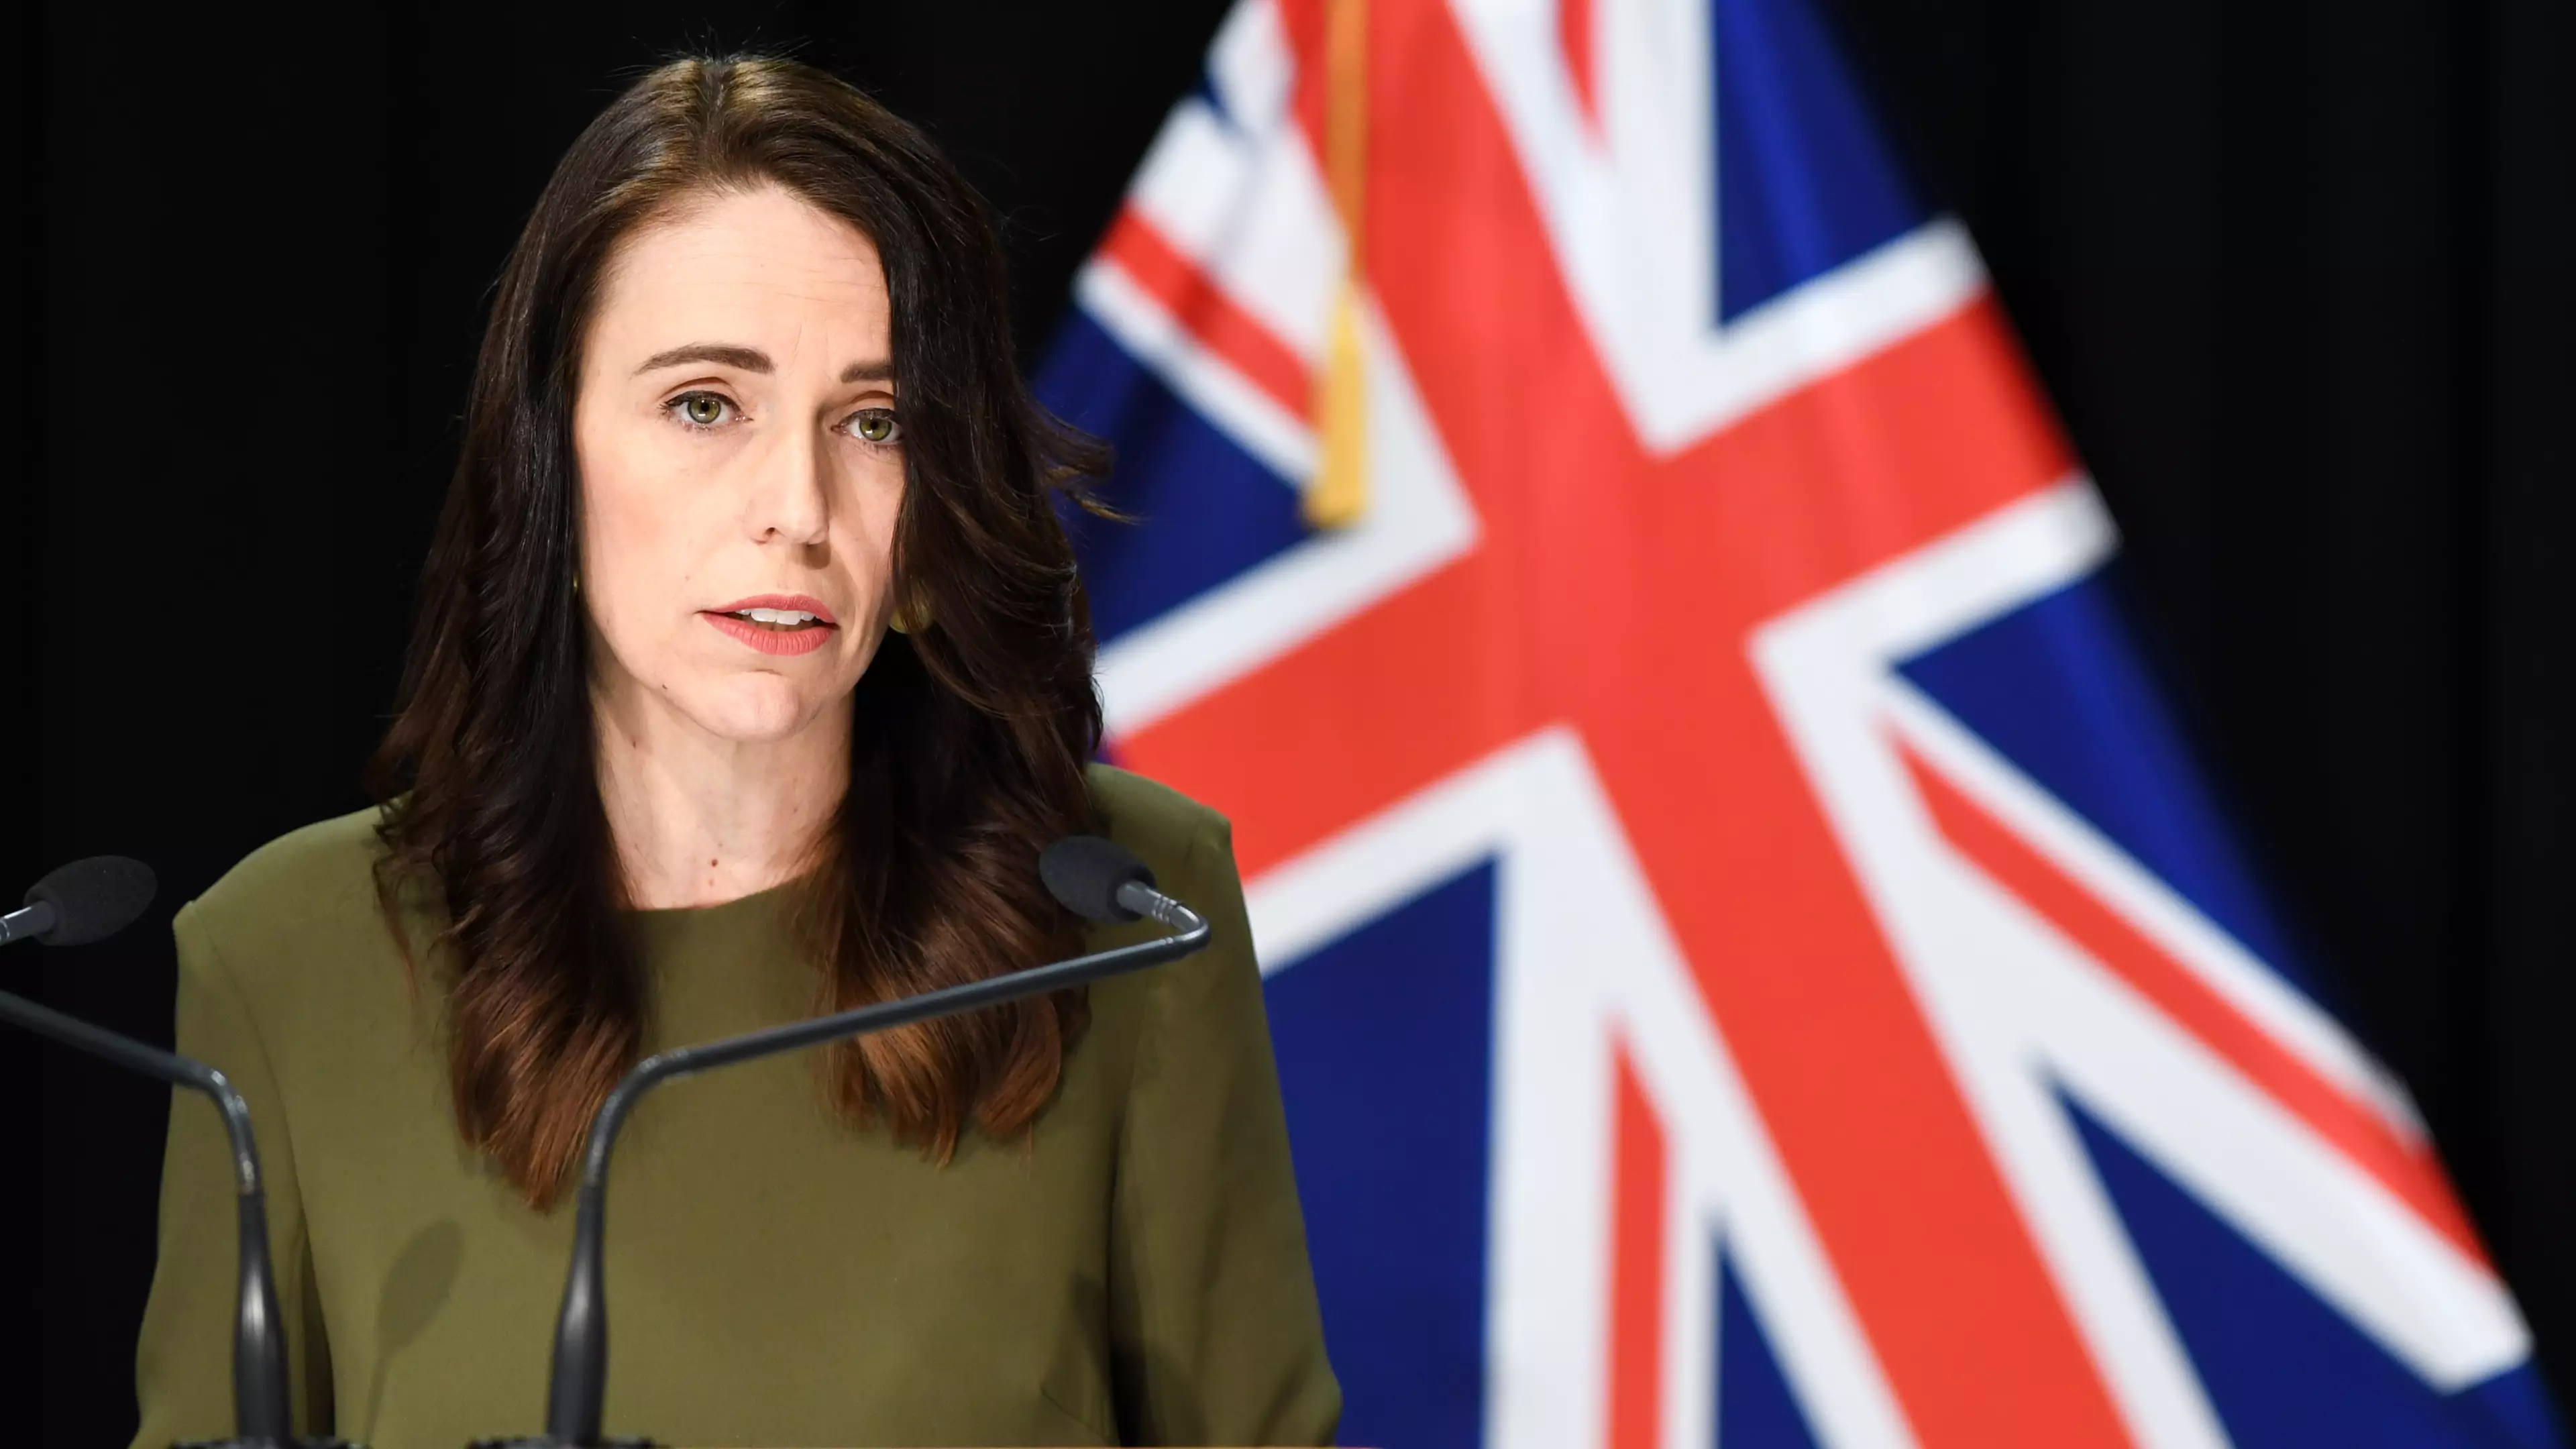 New Zealand To Keep Borders Closed For Most Of 2021, Jacinda Ardern Says